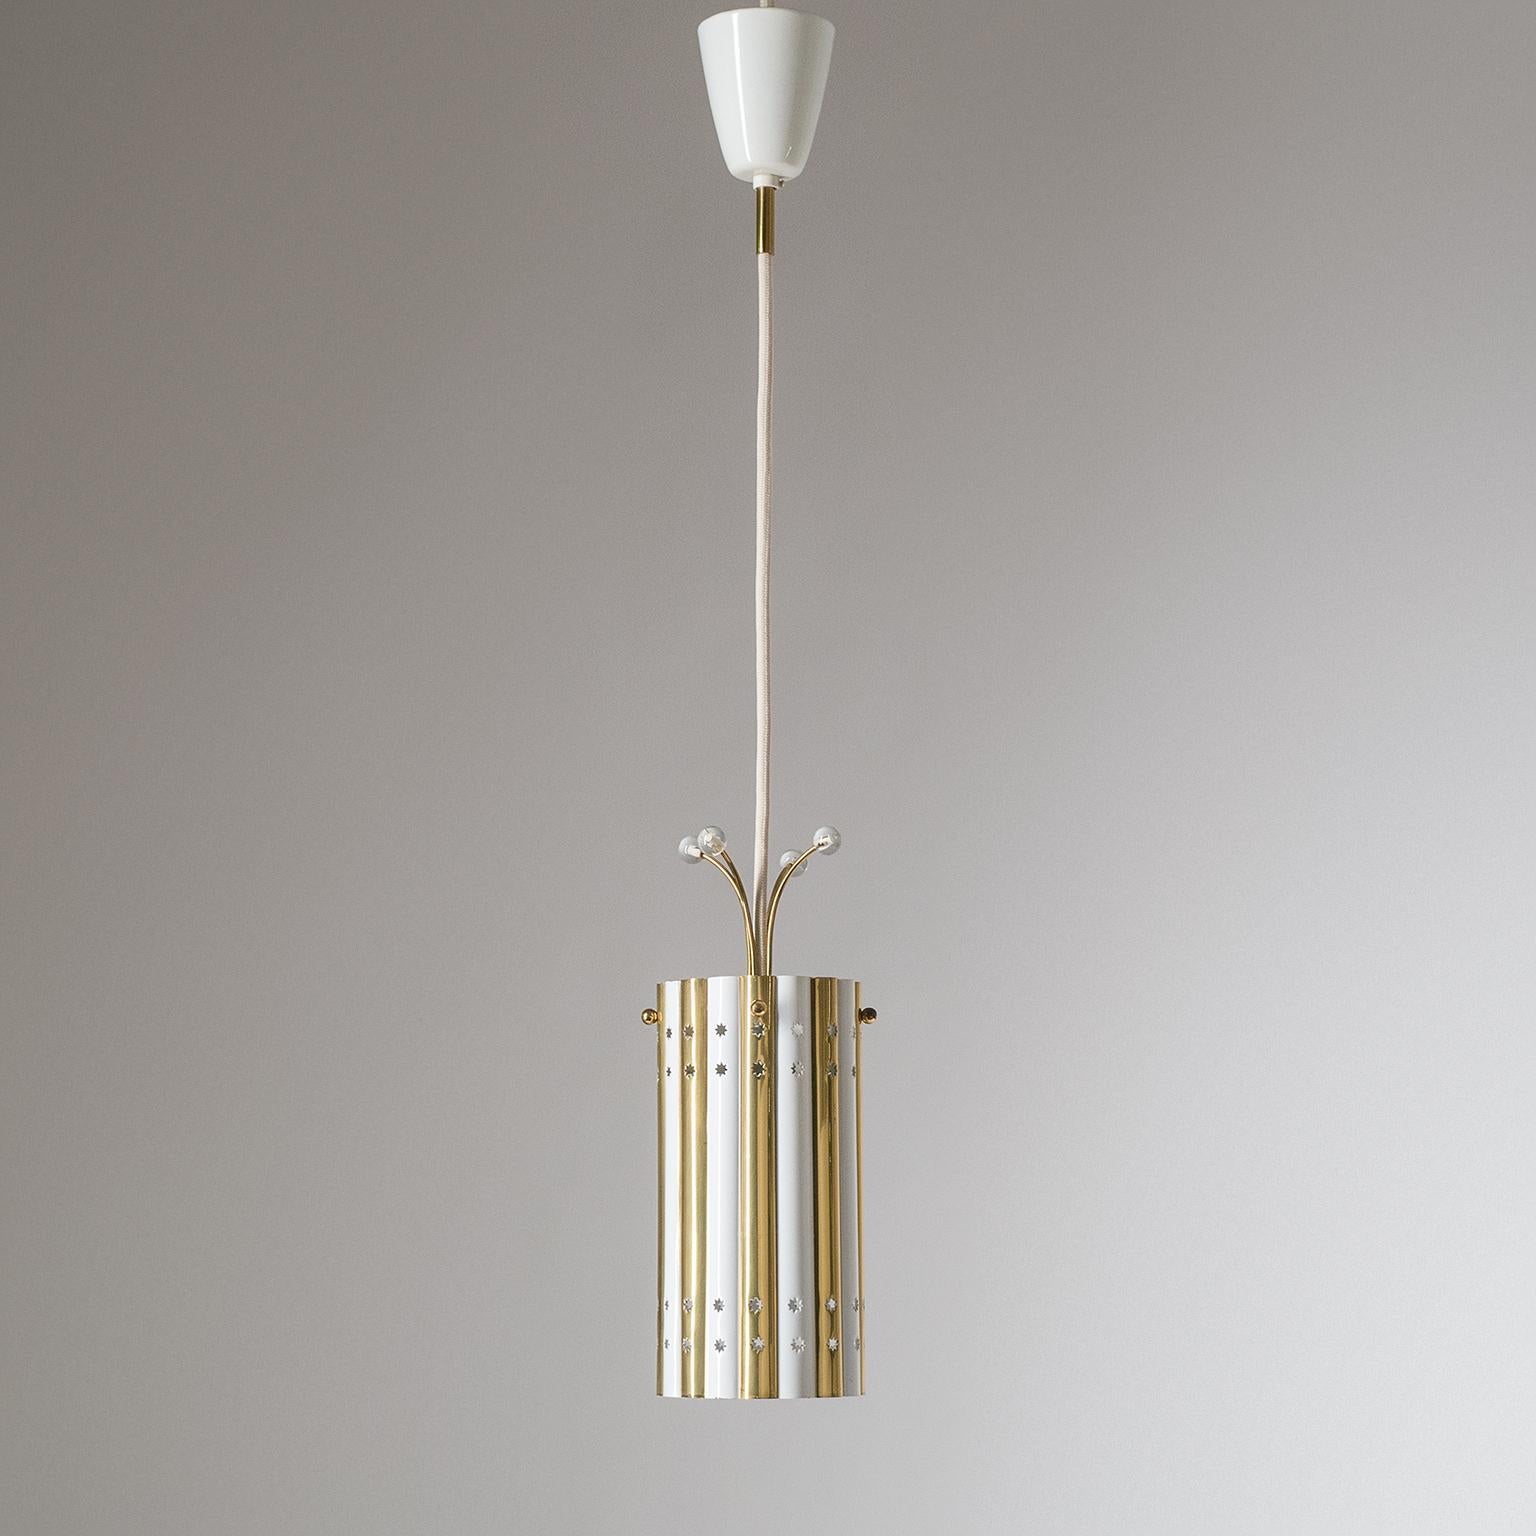 Very rare brass pendants/lanterns attributed to Emil Stejnar, 1950s. Made of sculpted sheet brass with alternating white lacquered stripes these unique pendants have four rows of star shaped cutouts and are topped off with charming glass adorned